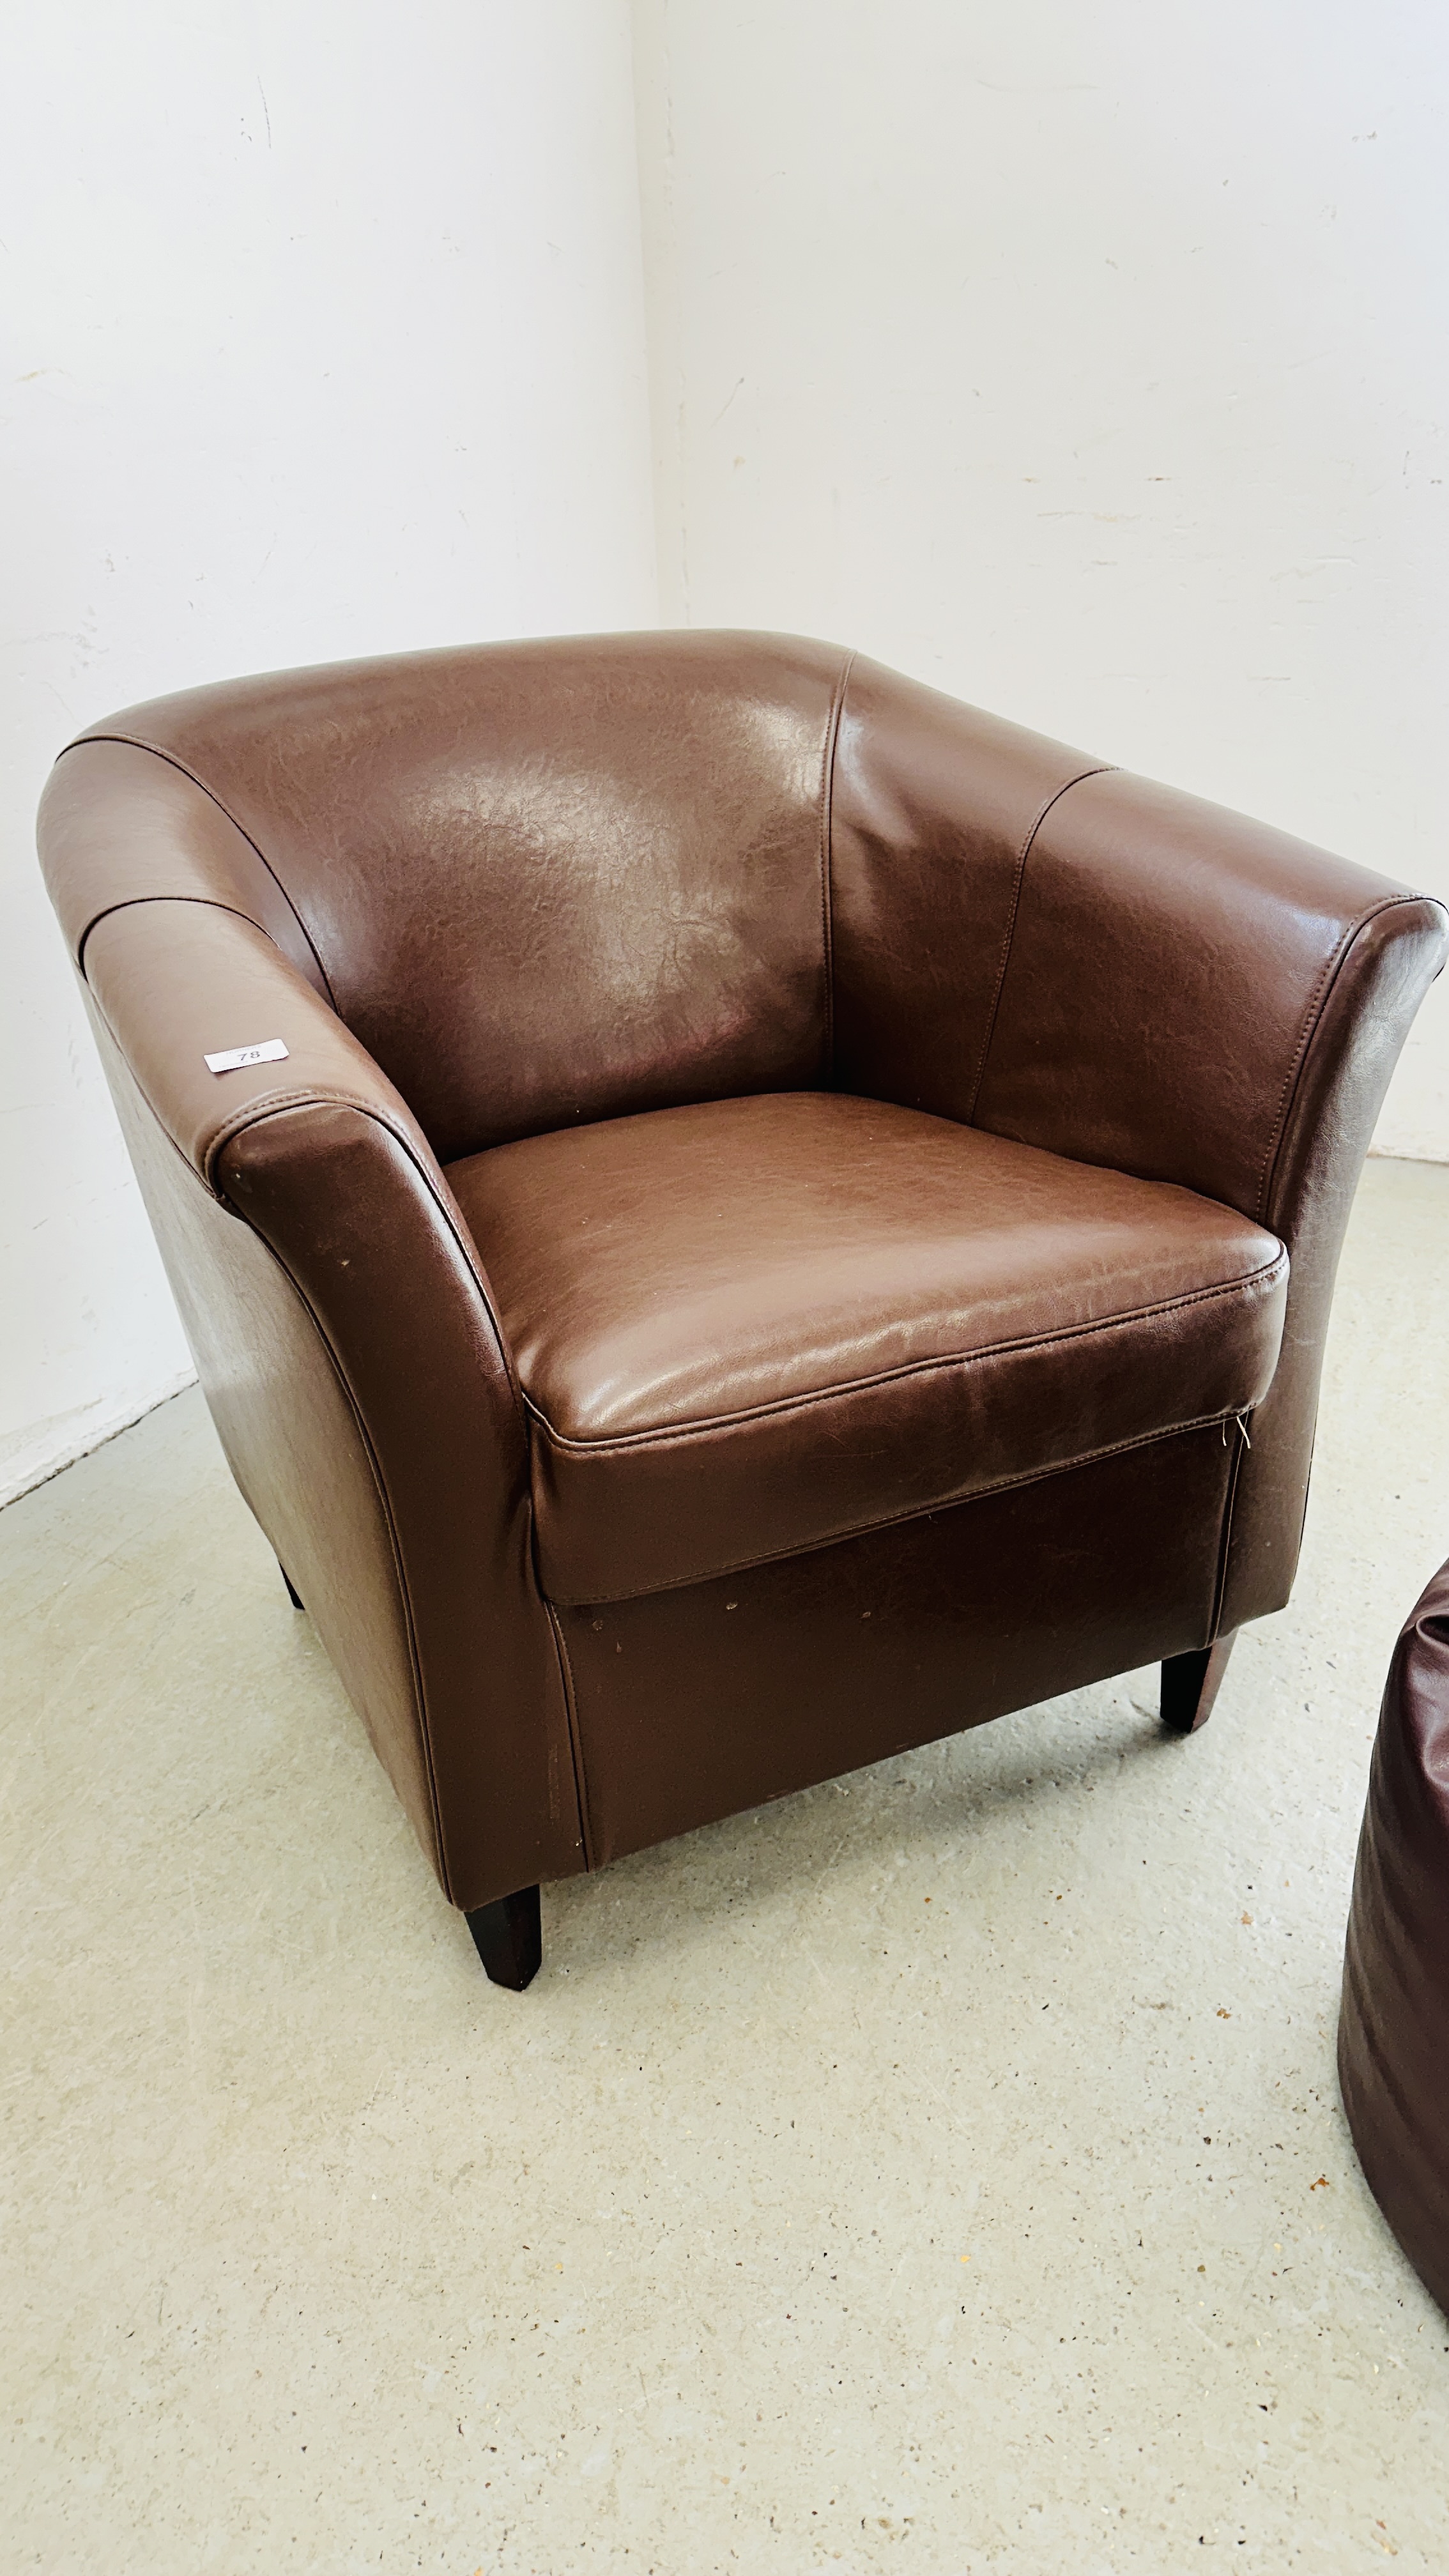 A MODERN BROWN FAUX LEATHER TUB CHAIR ALONG WITH MATCHING BEAN BAG FOOT REST. - Image 2 of 11